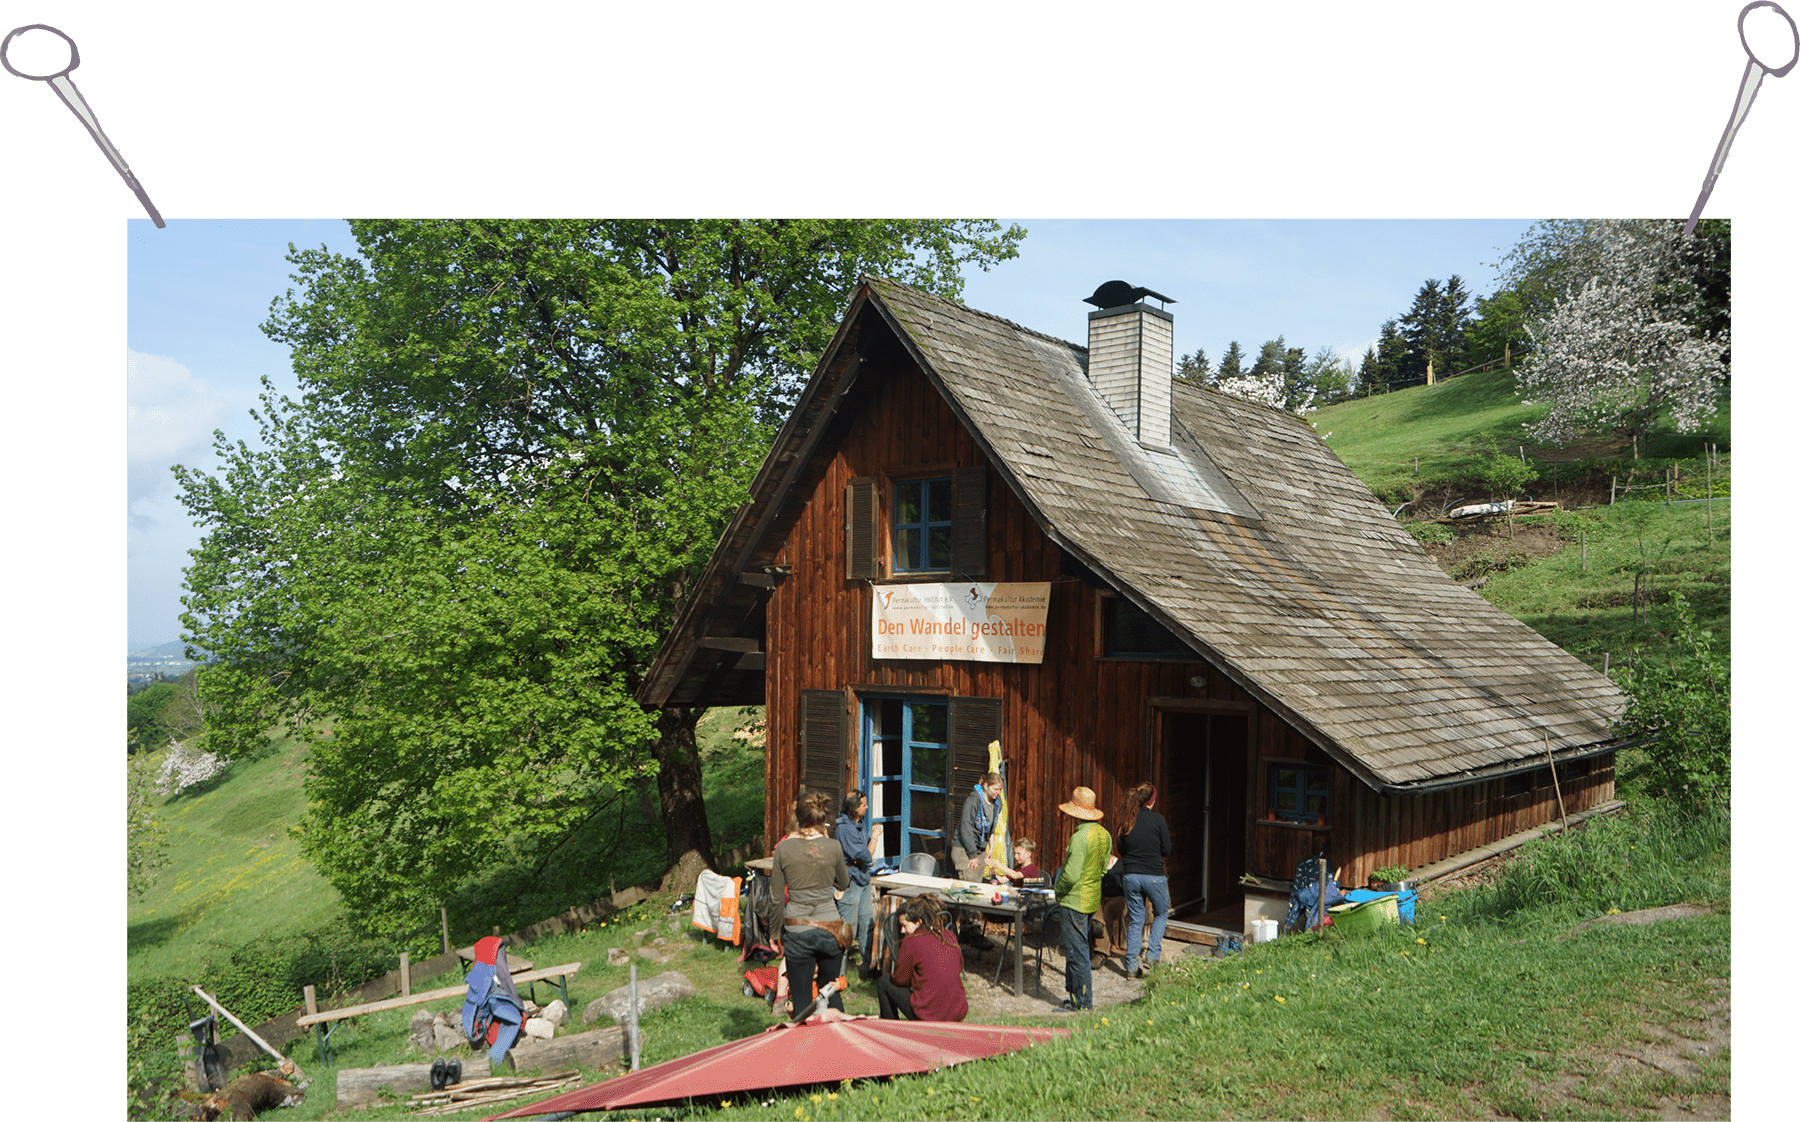 The Häuslemaierhof is a farm located in the municipality of Buchenbach not far from Freiburg.